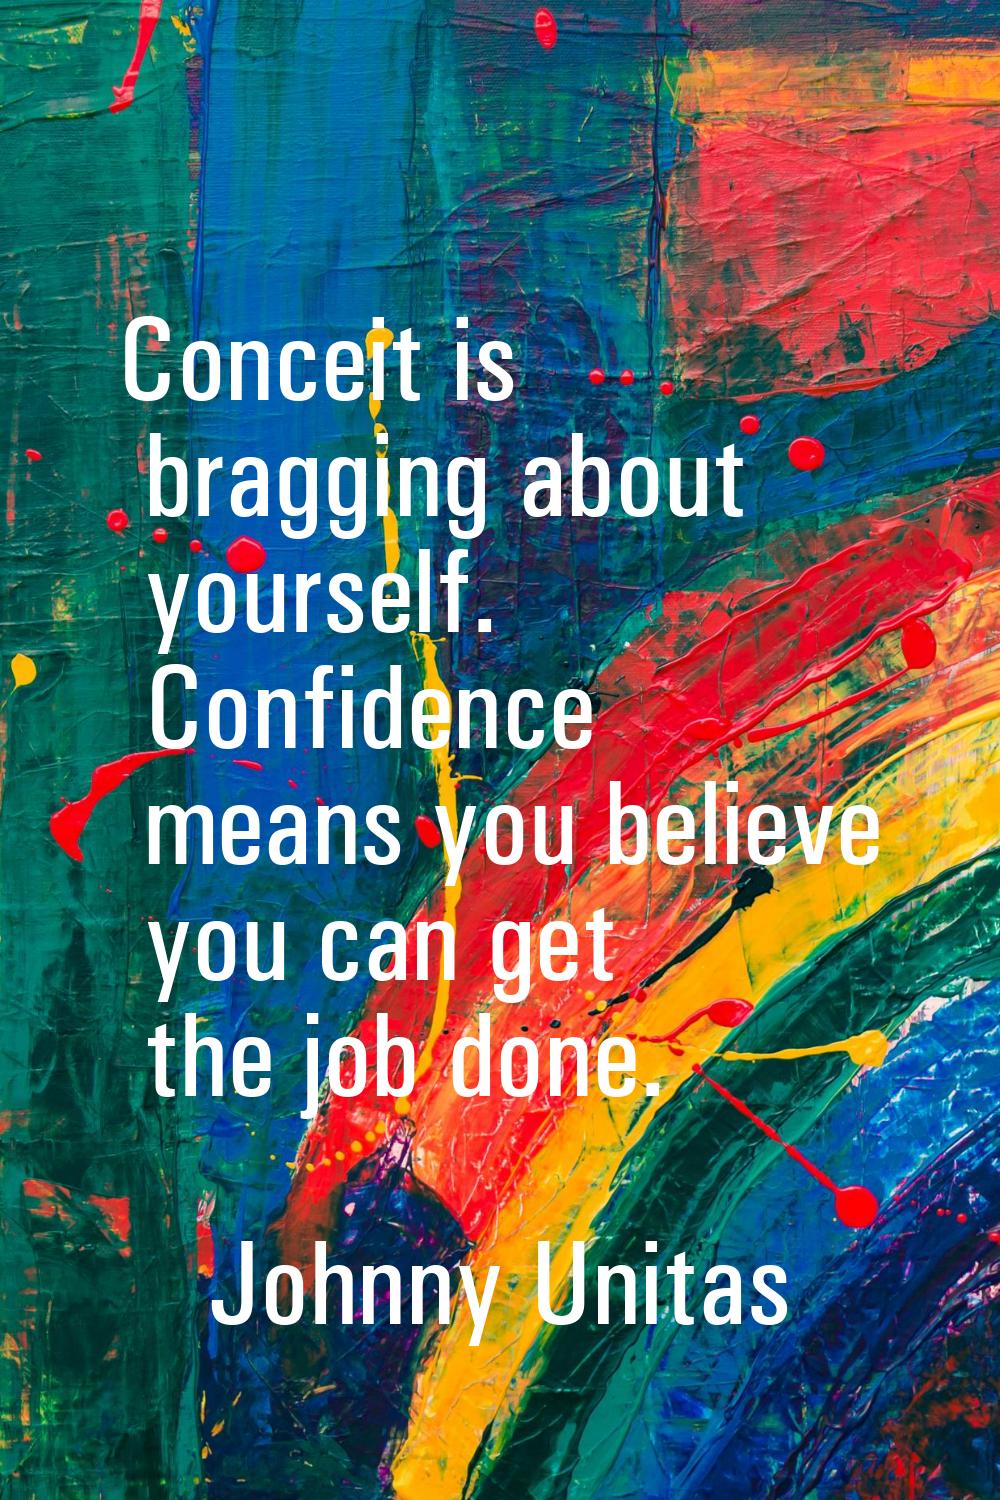 Conceit is bragging about yourself. Confidence means you believe you can get the job done.